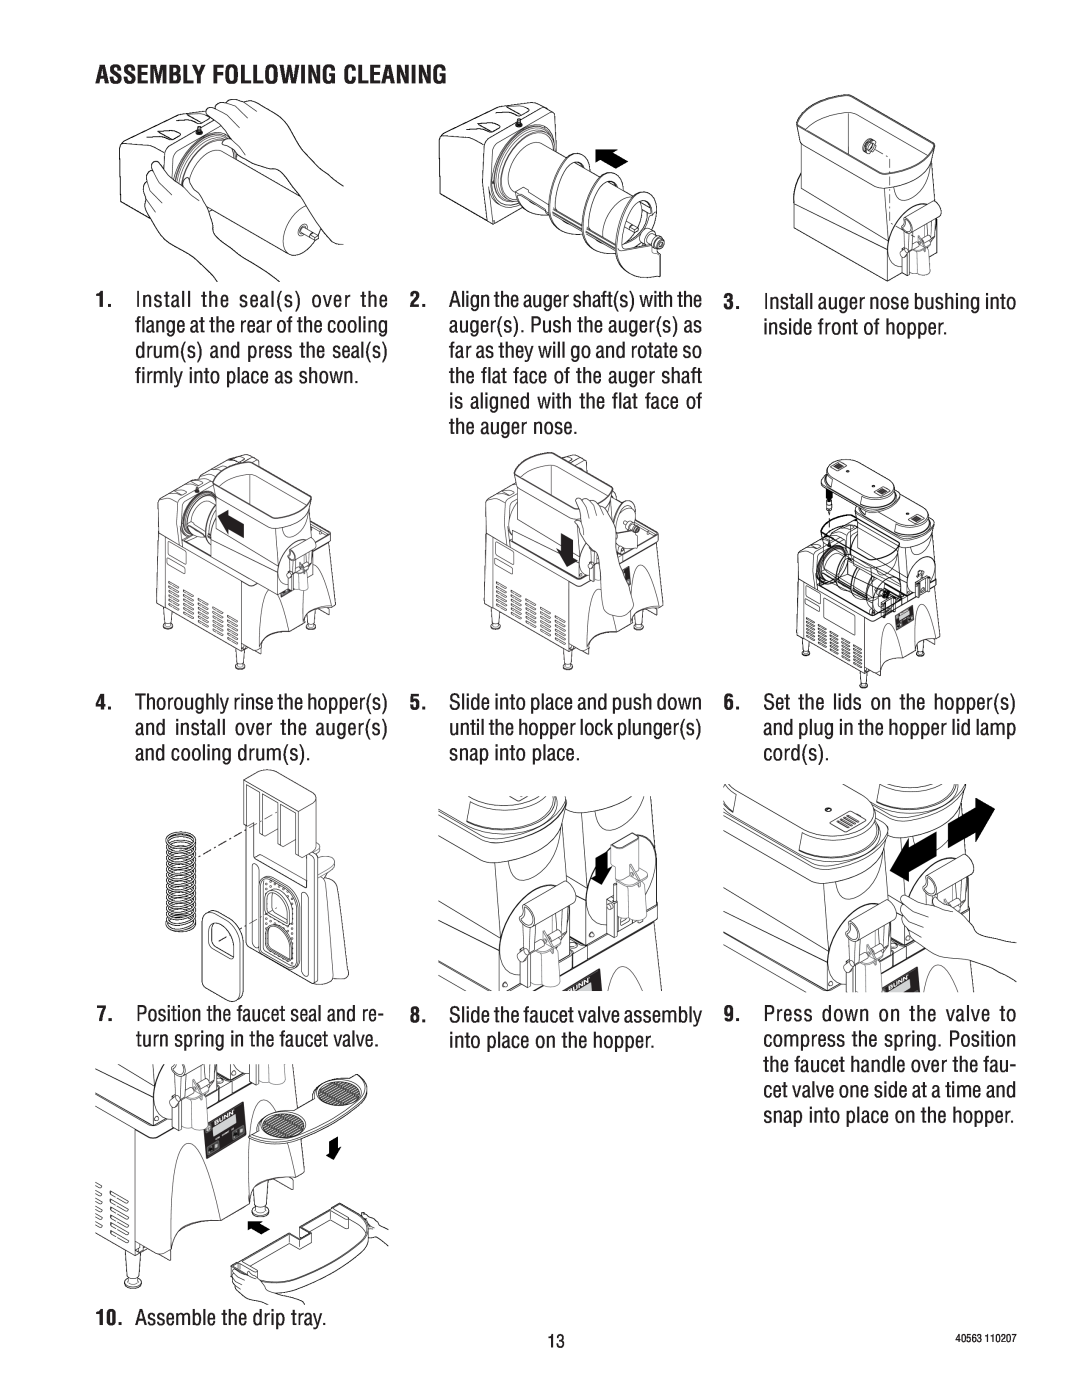 Bunn Ultra 2, ULTRA-1 service manual Assembly Following Cleaning 